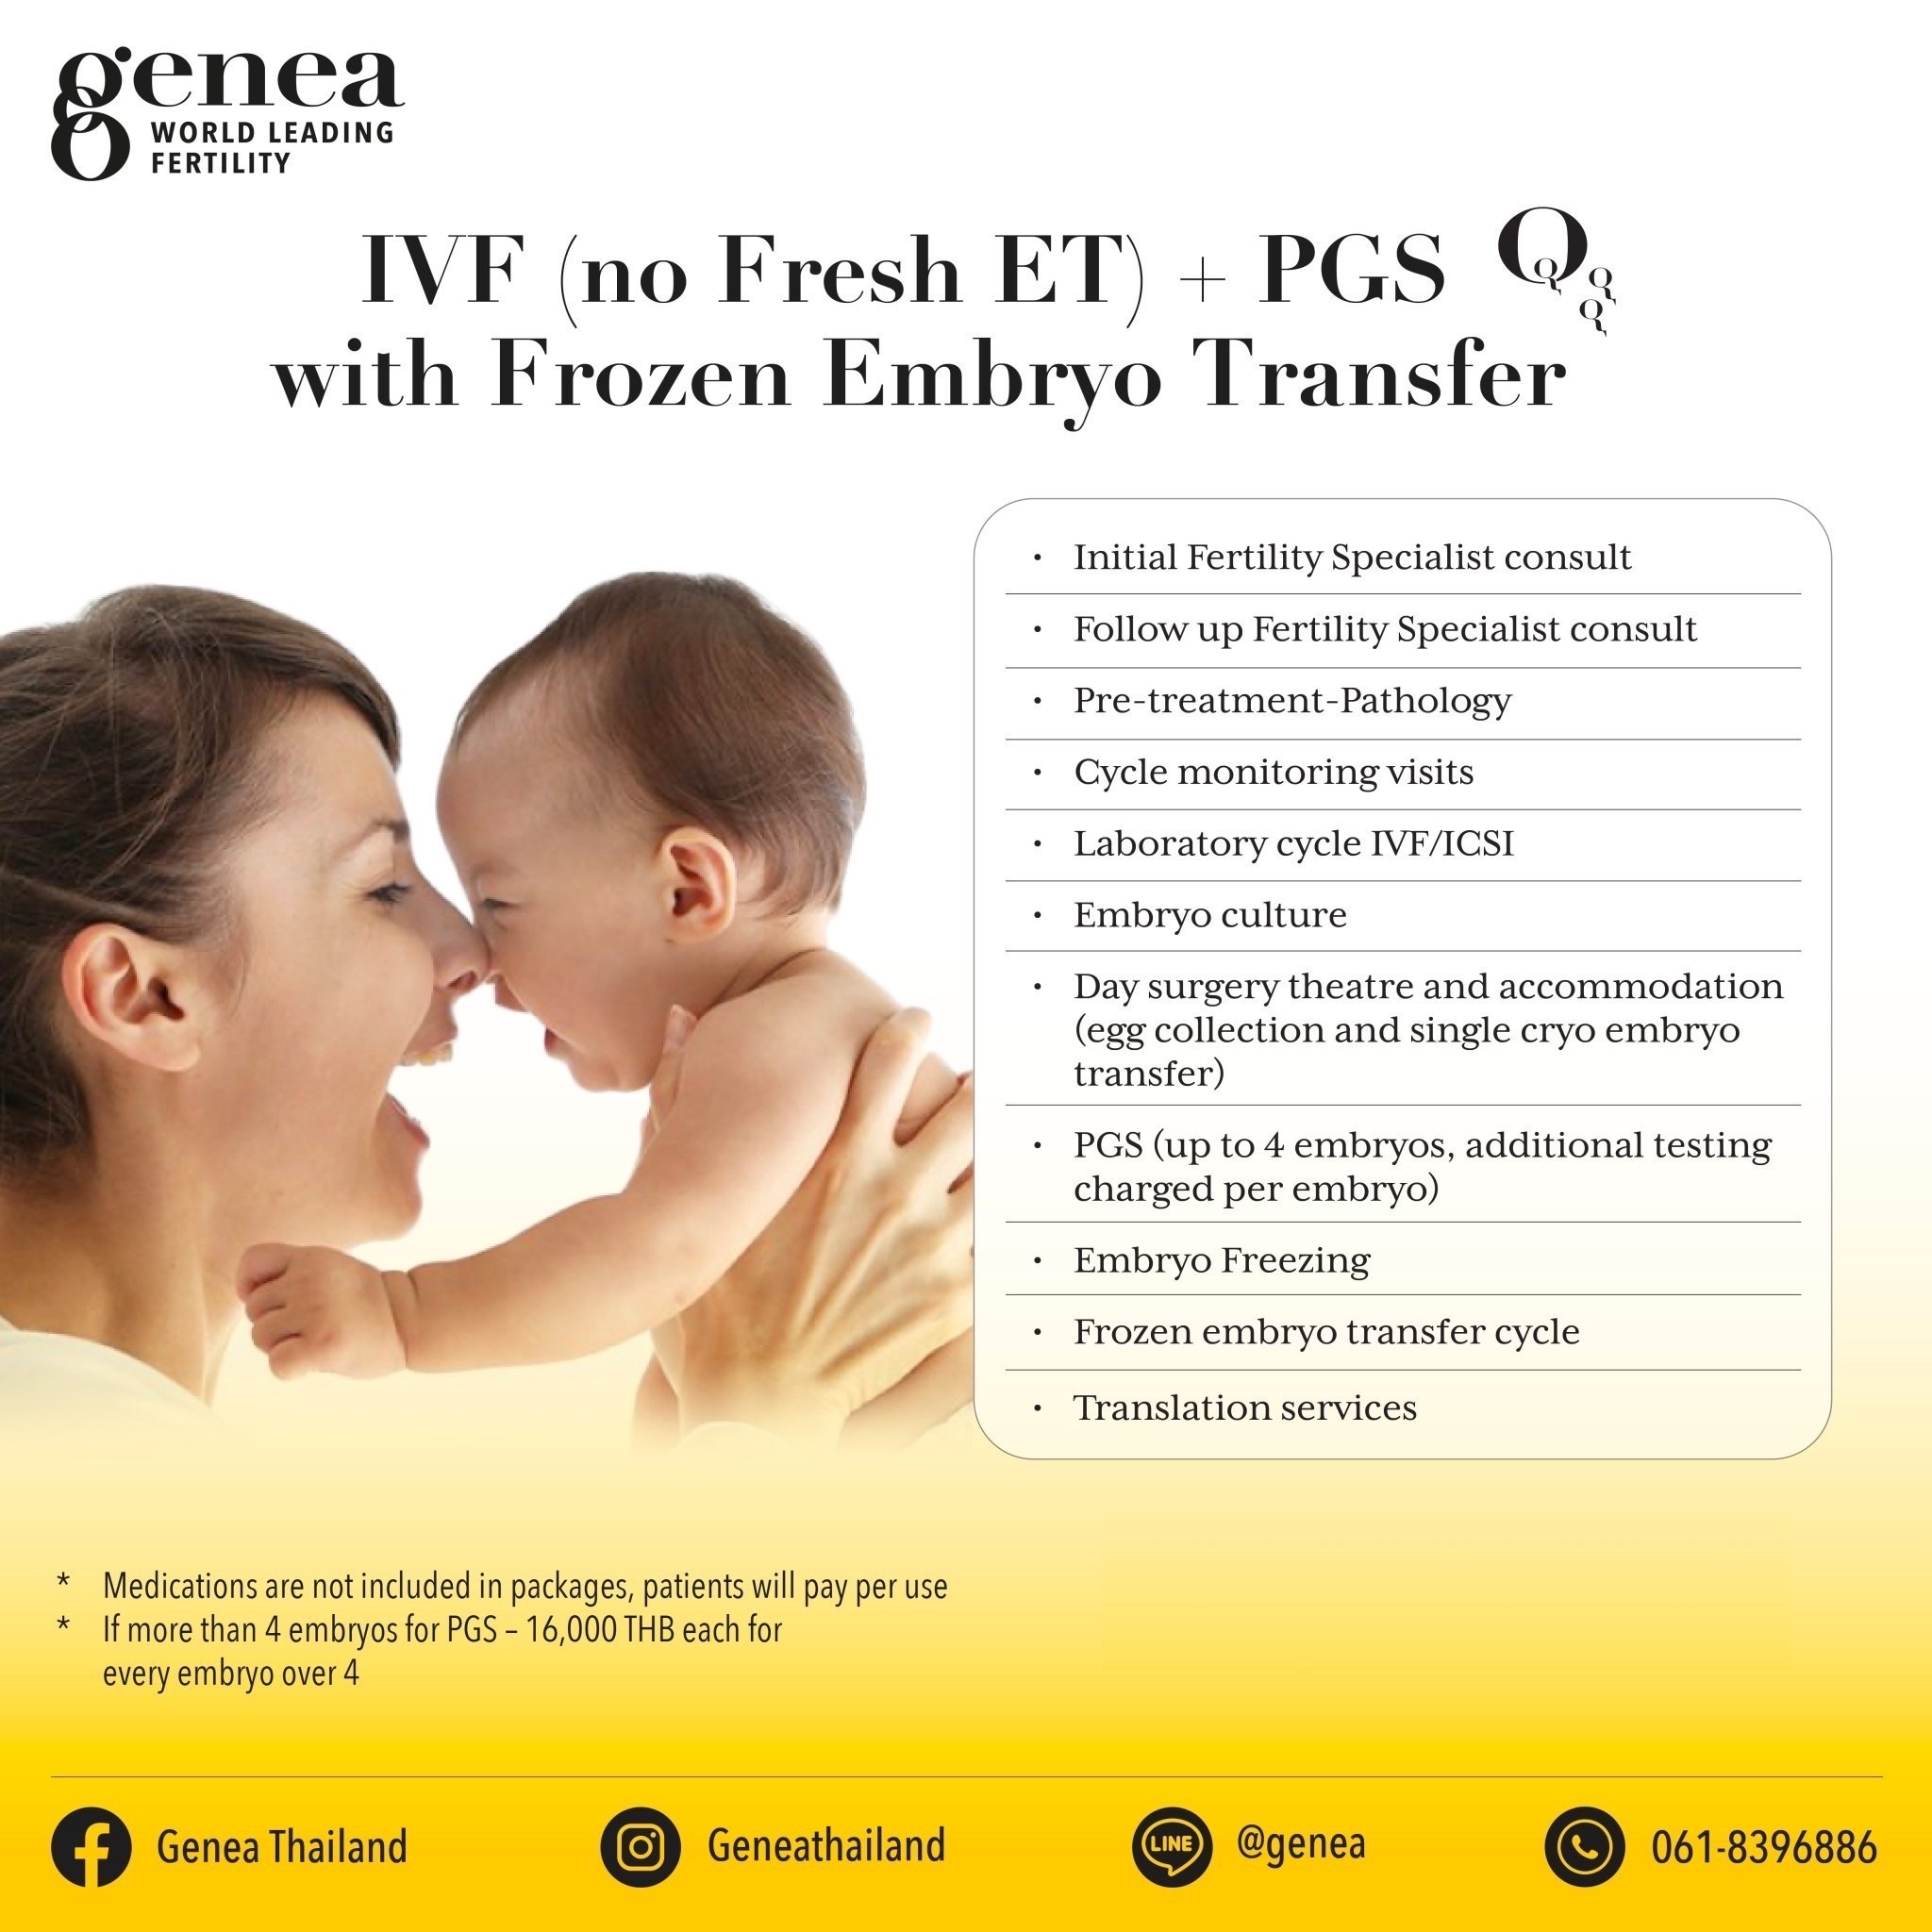 IVF (No Fresh ET) + PGS Q with Frozen Embryo Transfer